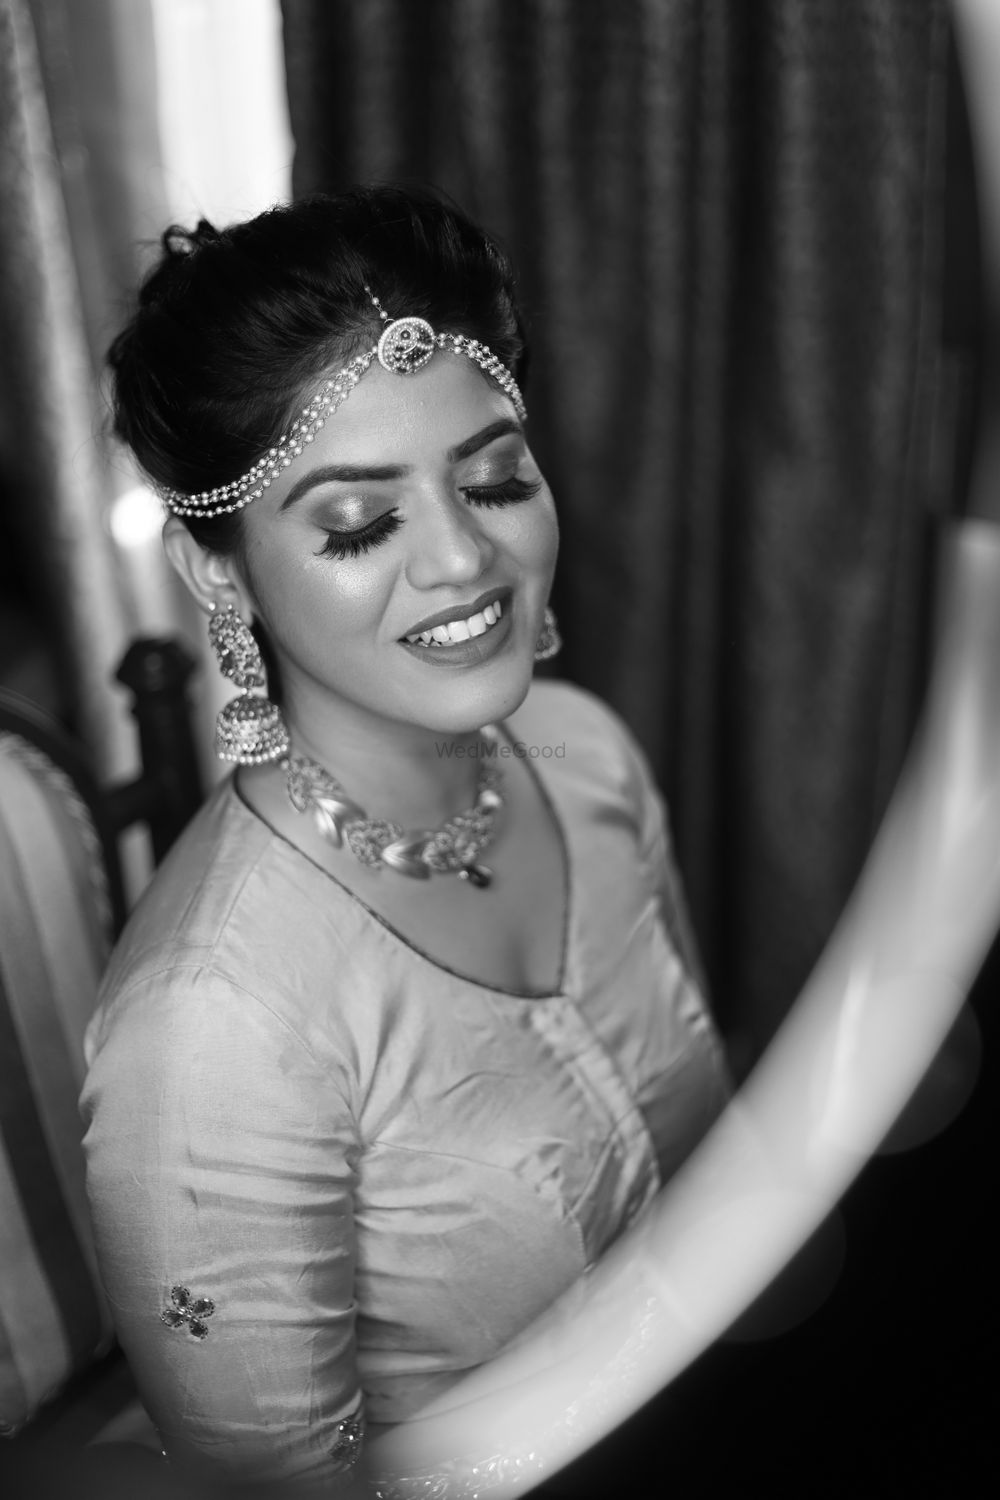 Photo From Brides 2020 - By Arpita Behl